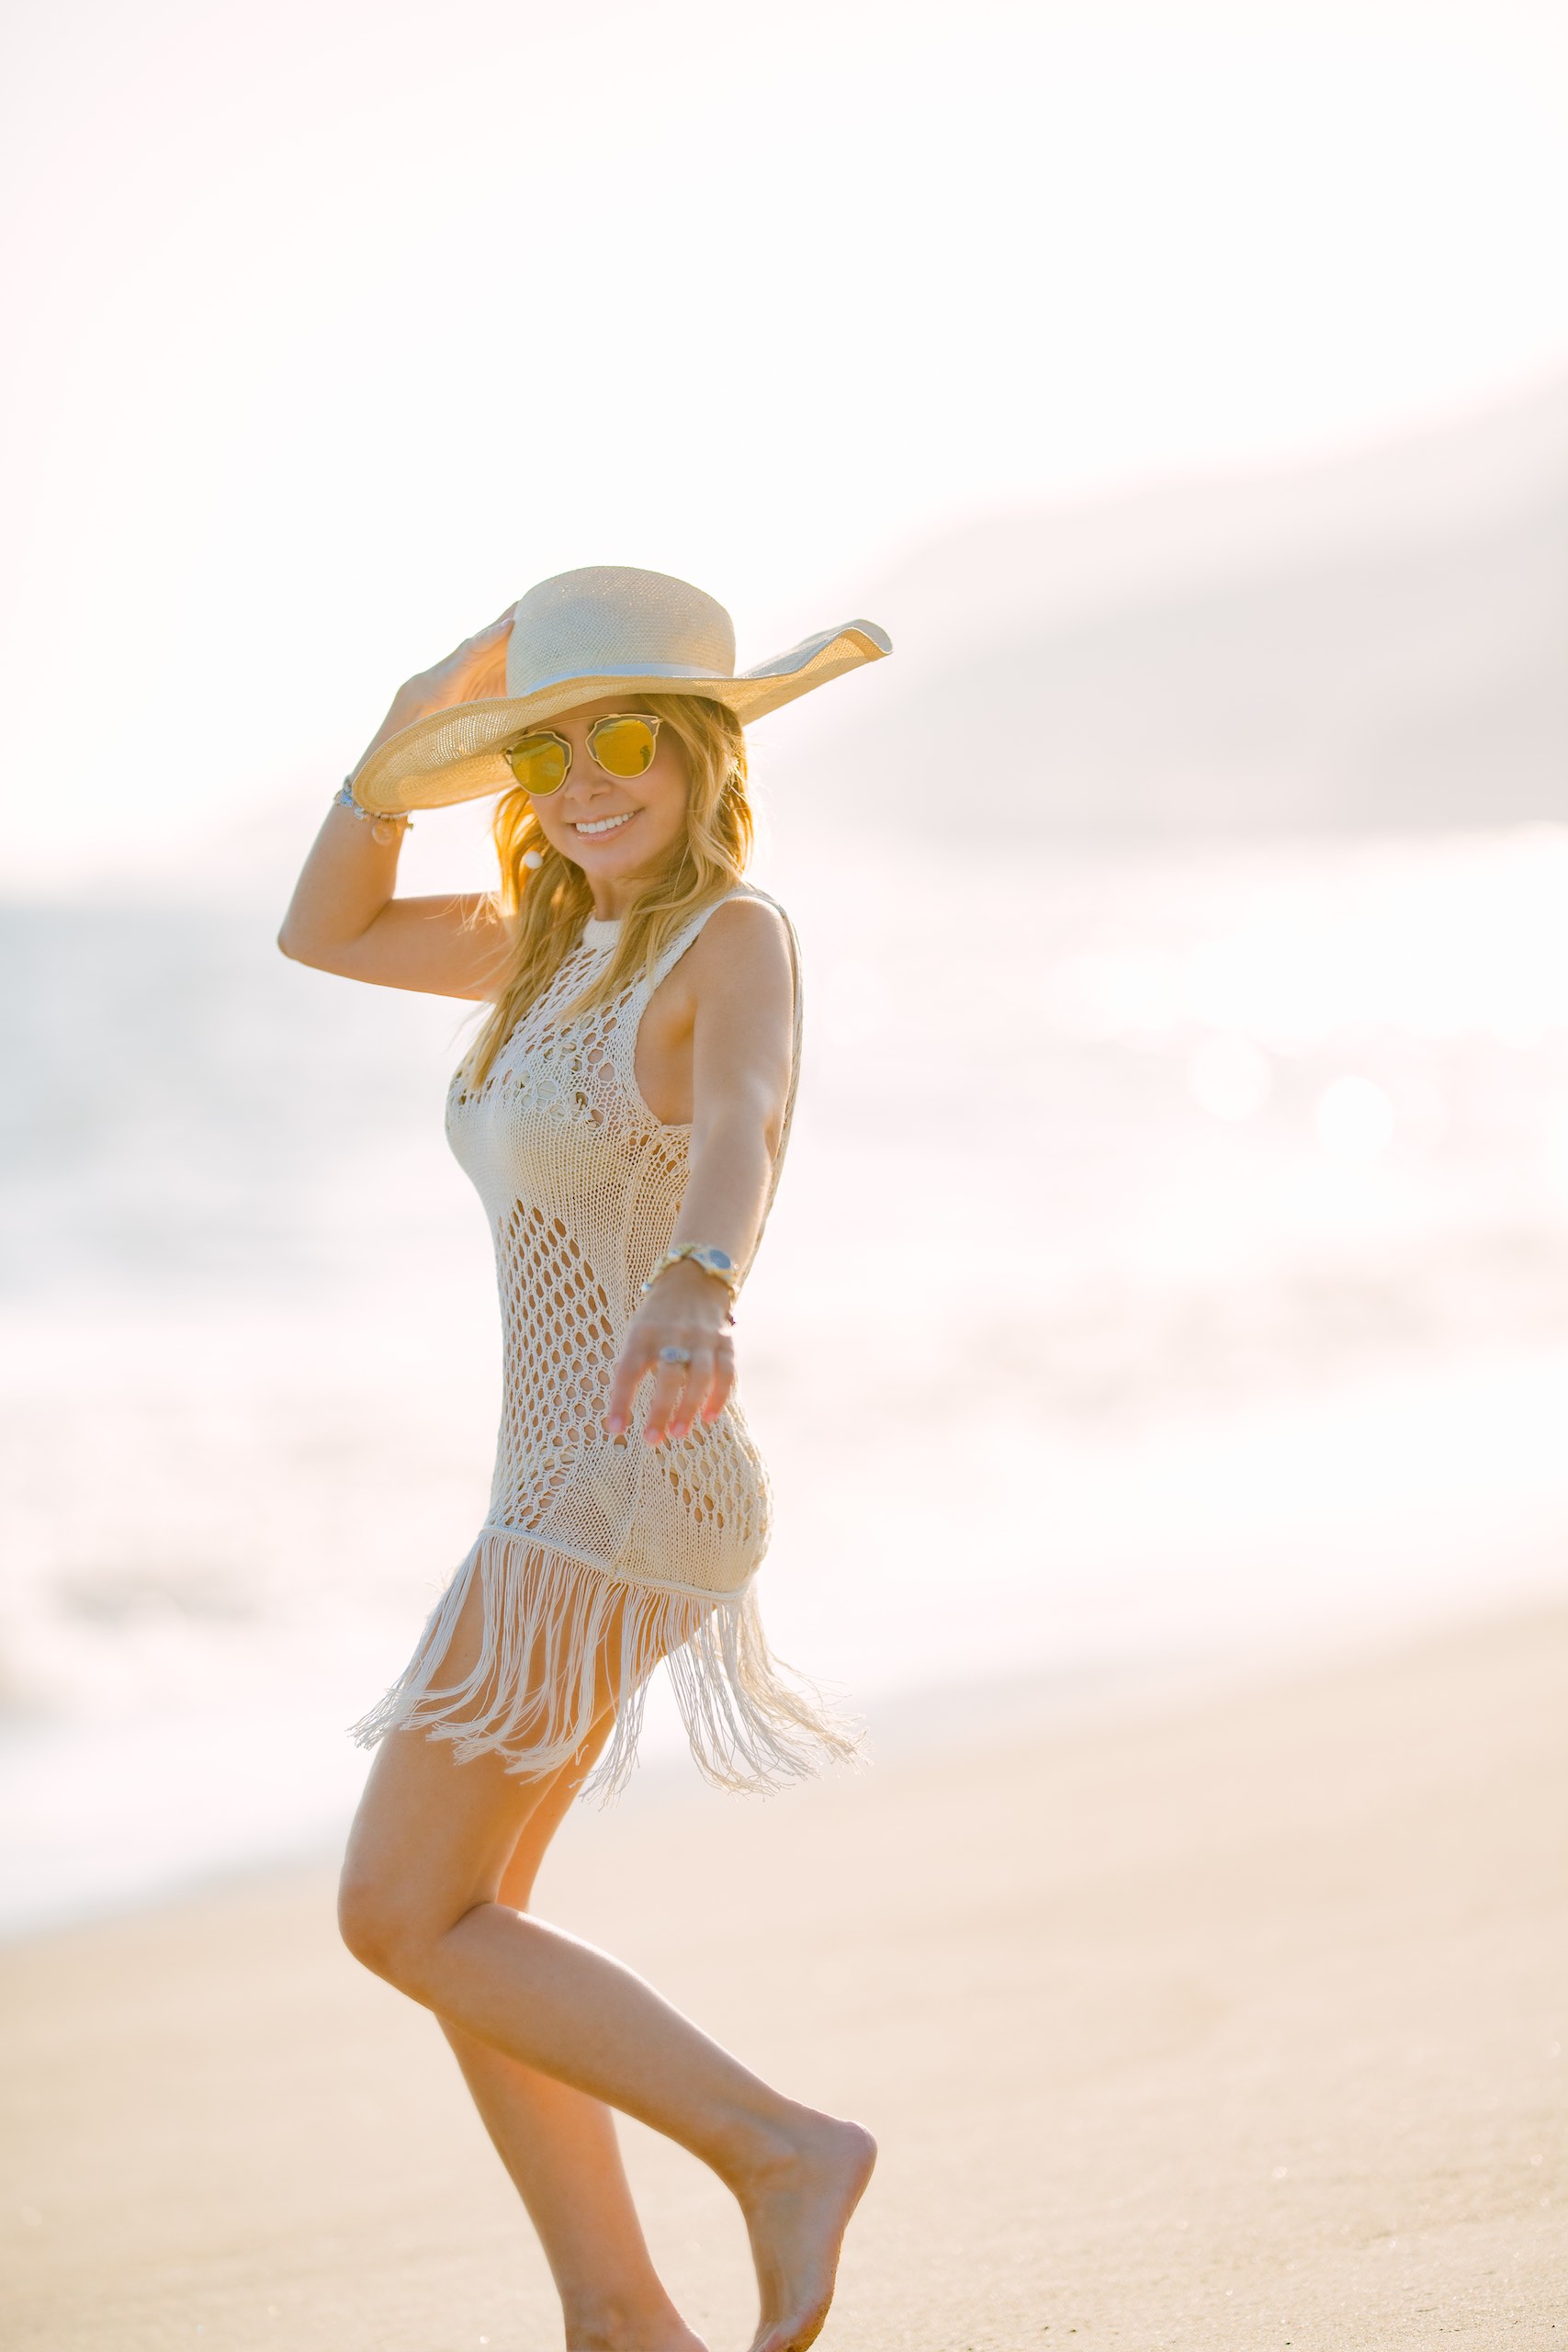 Peretti Italy Woman with long blond hair wearing a knitted white dress and a beige hat smiling for the camera on a beach barefoot